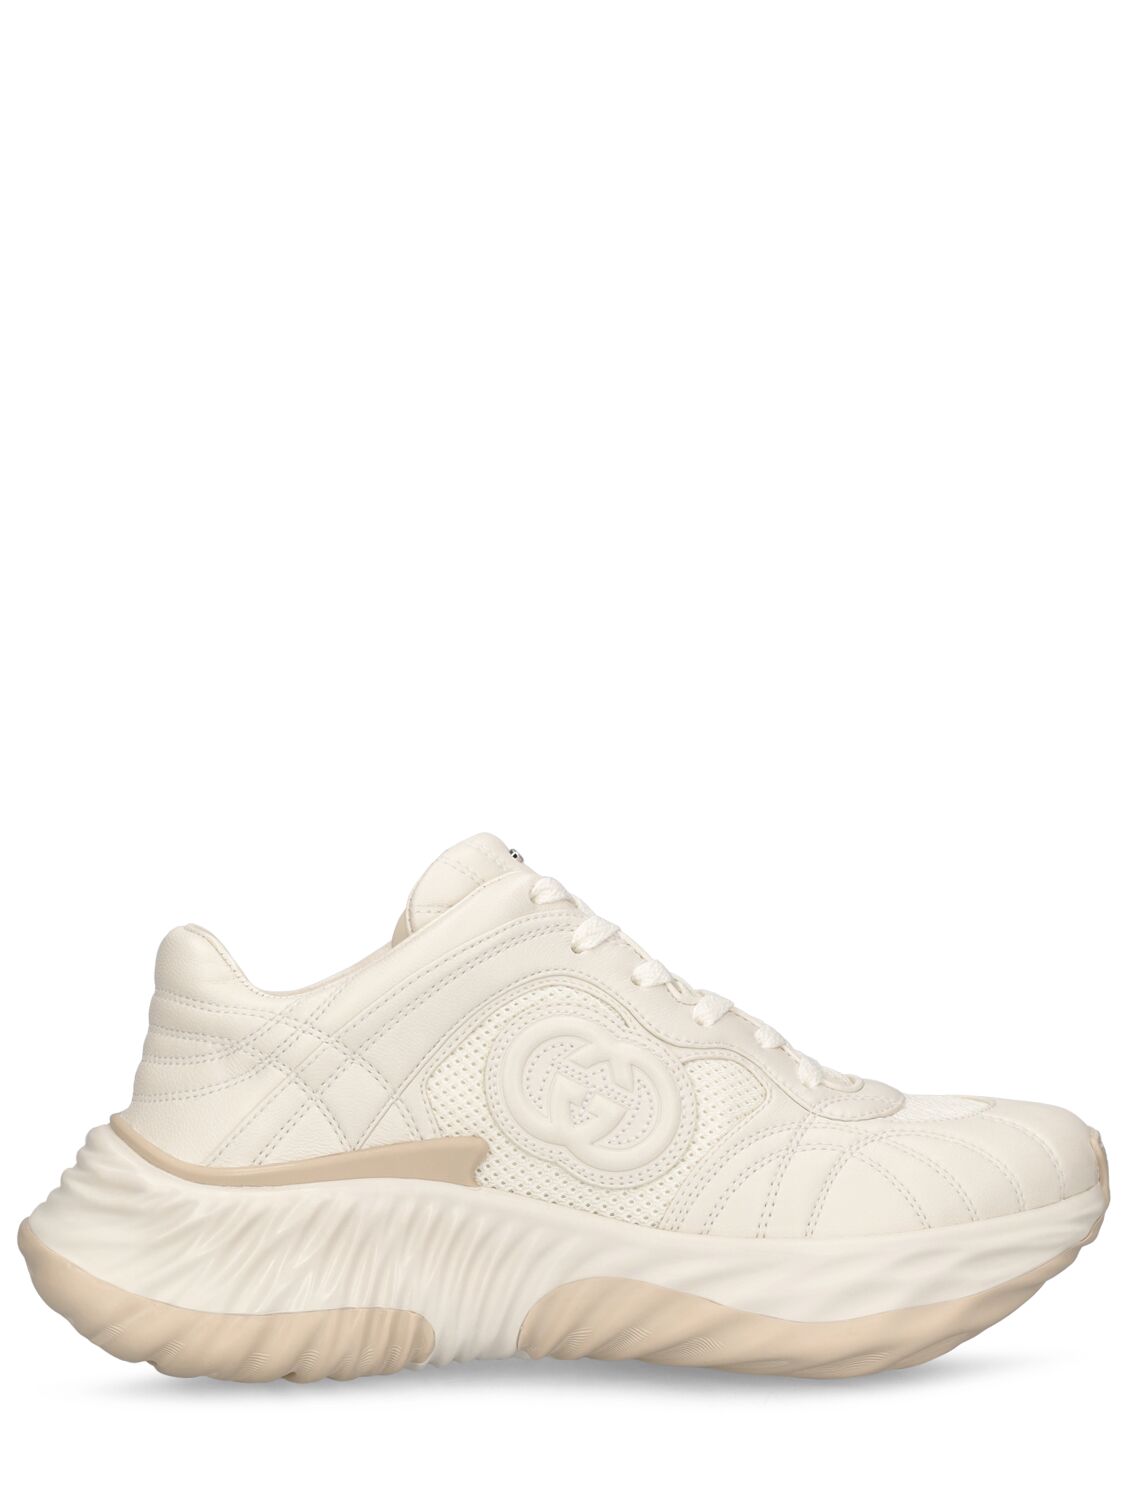 Gucci 65mm Ripple Leather Sneakers In Off White